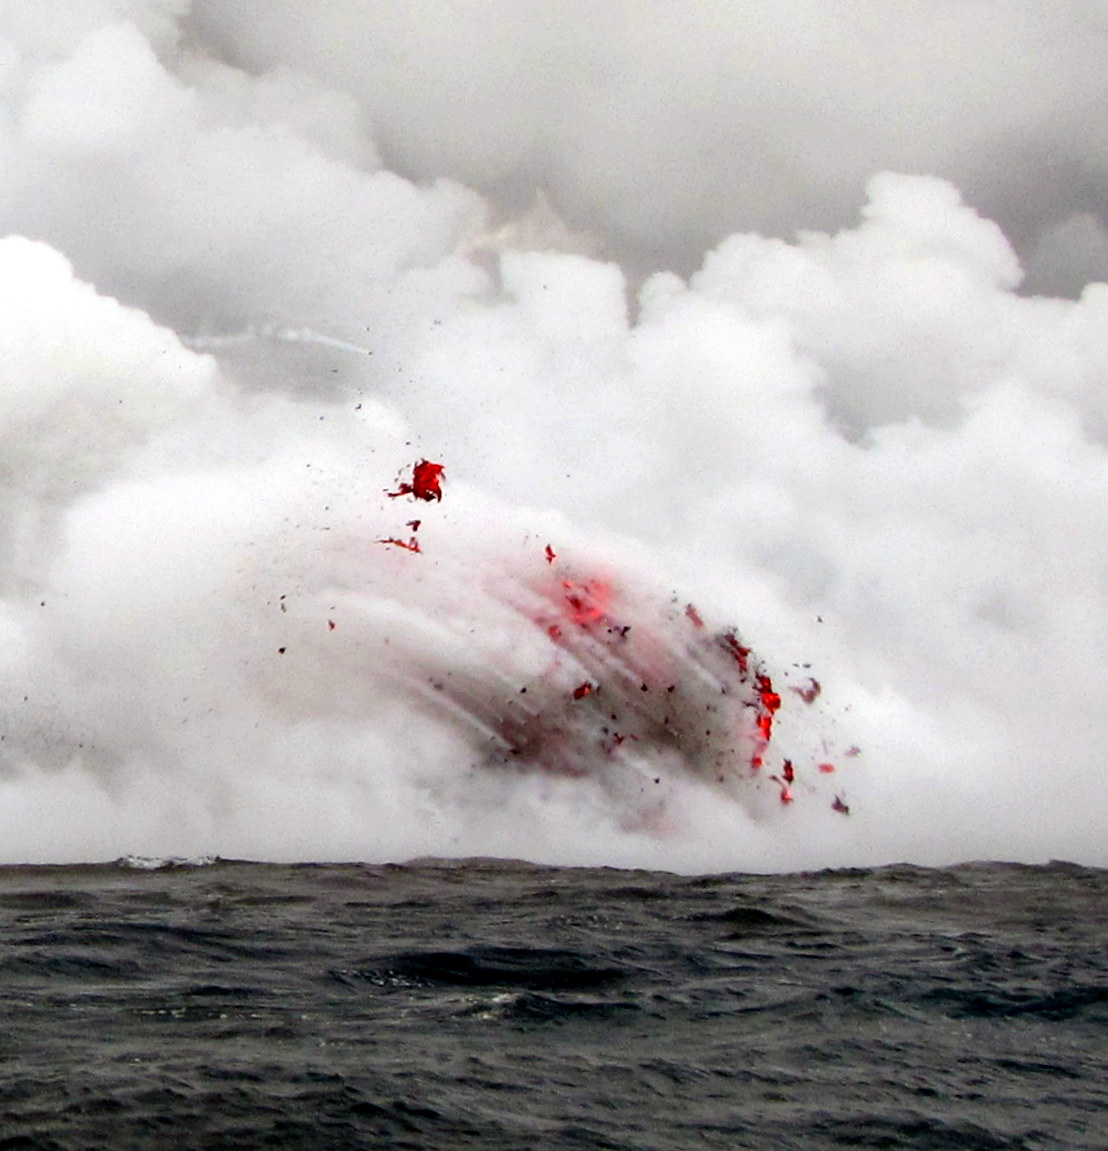 Explosions at Ocean Entry